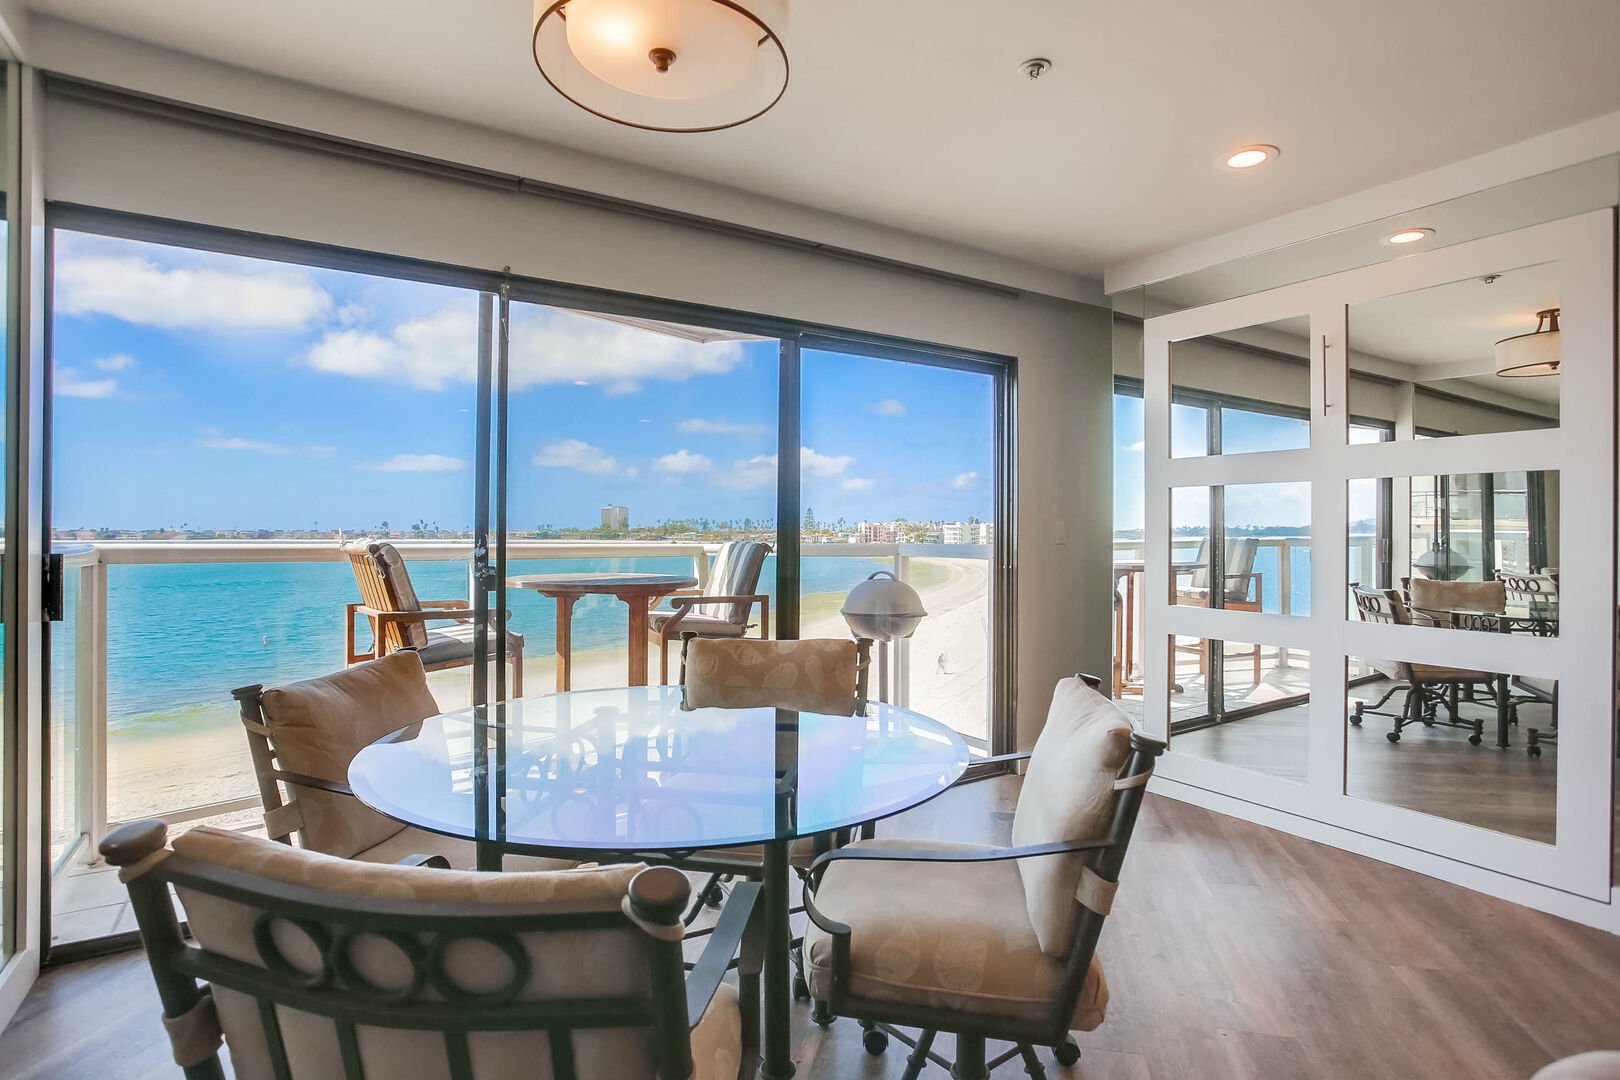 Dining area with a view!